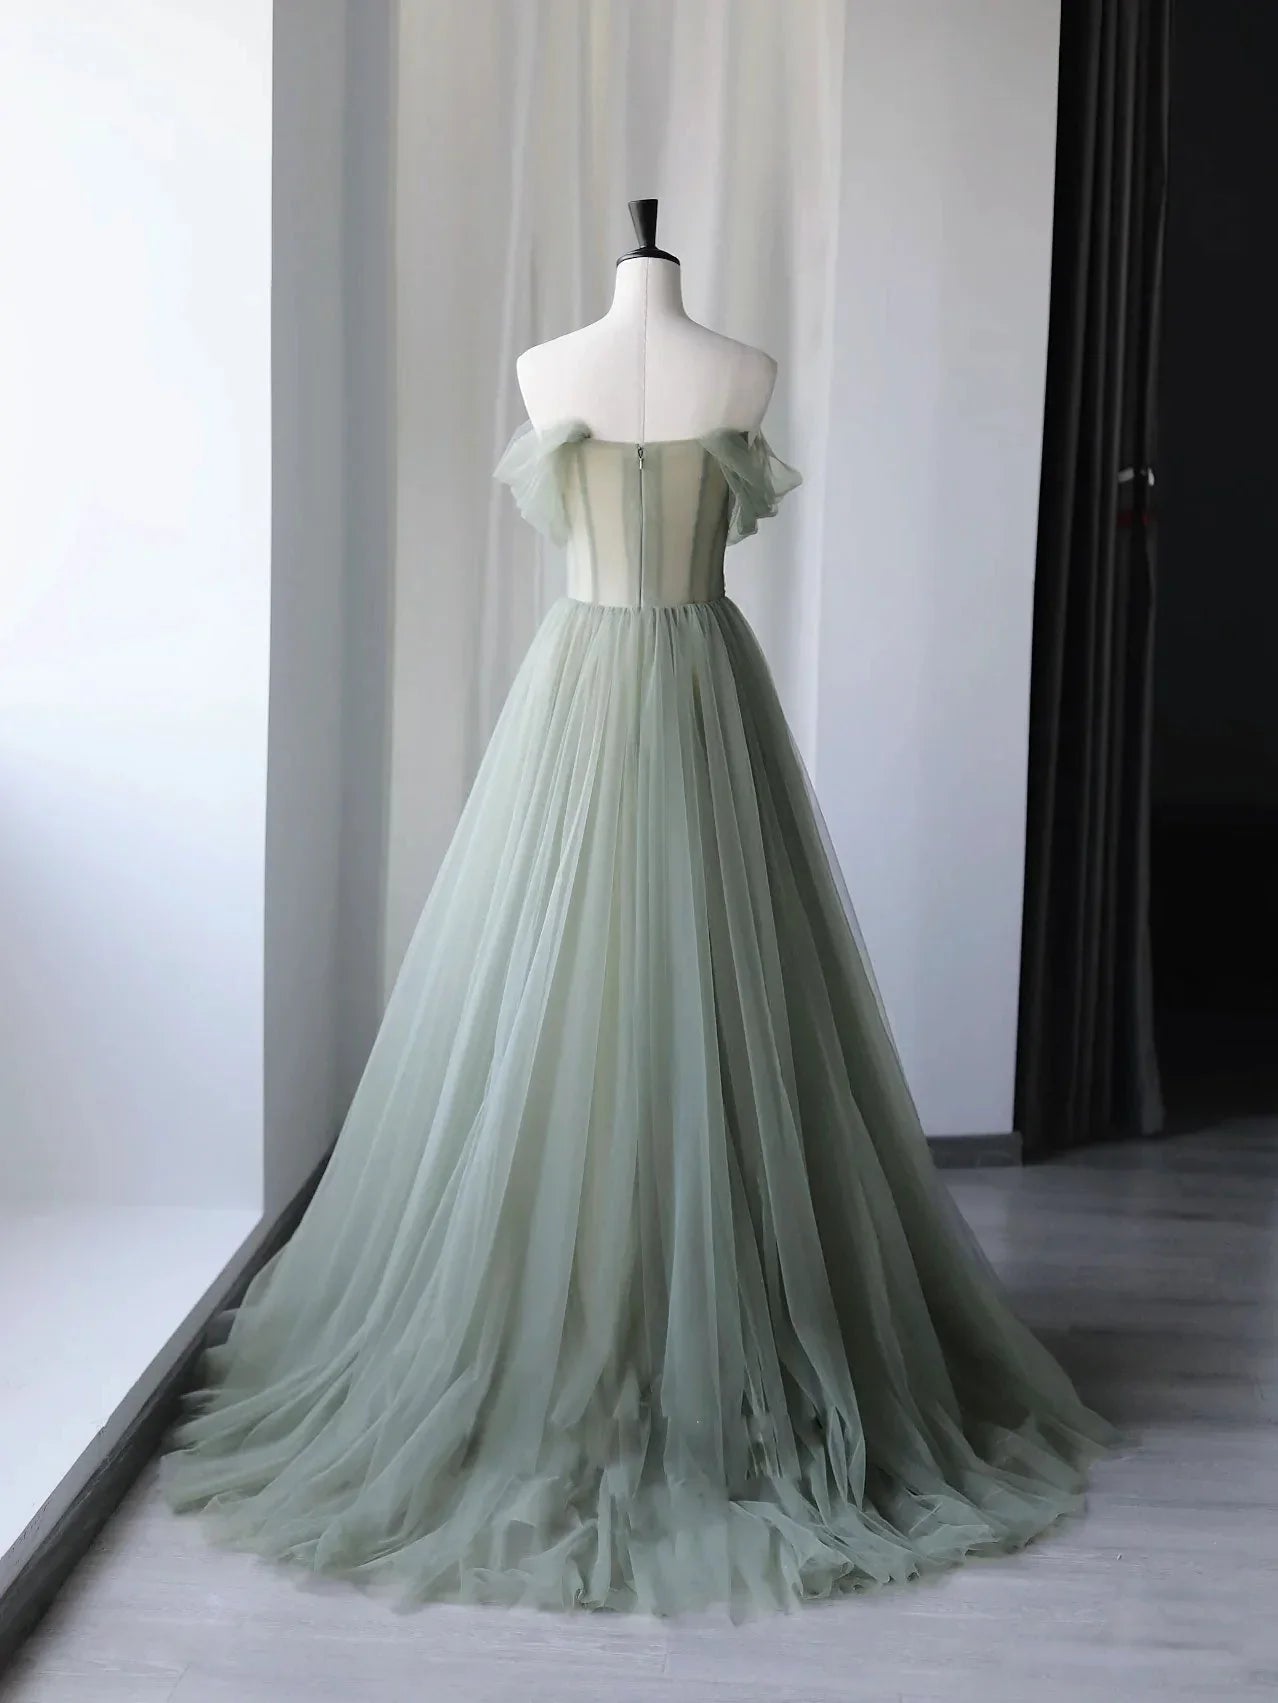 Bridesmaid Dresses Strapless, A-Line Green Tulle Long Prom Dress,Unique Formal Evening Dresses